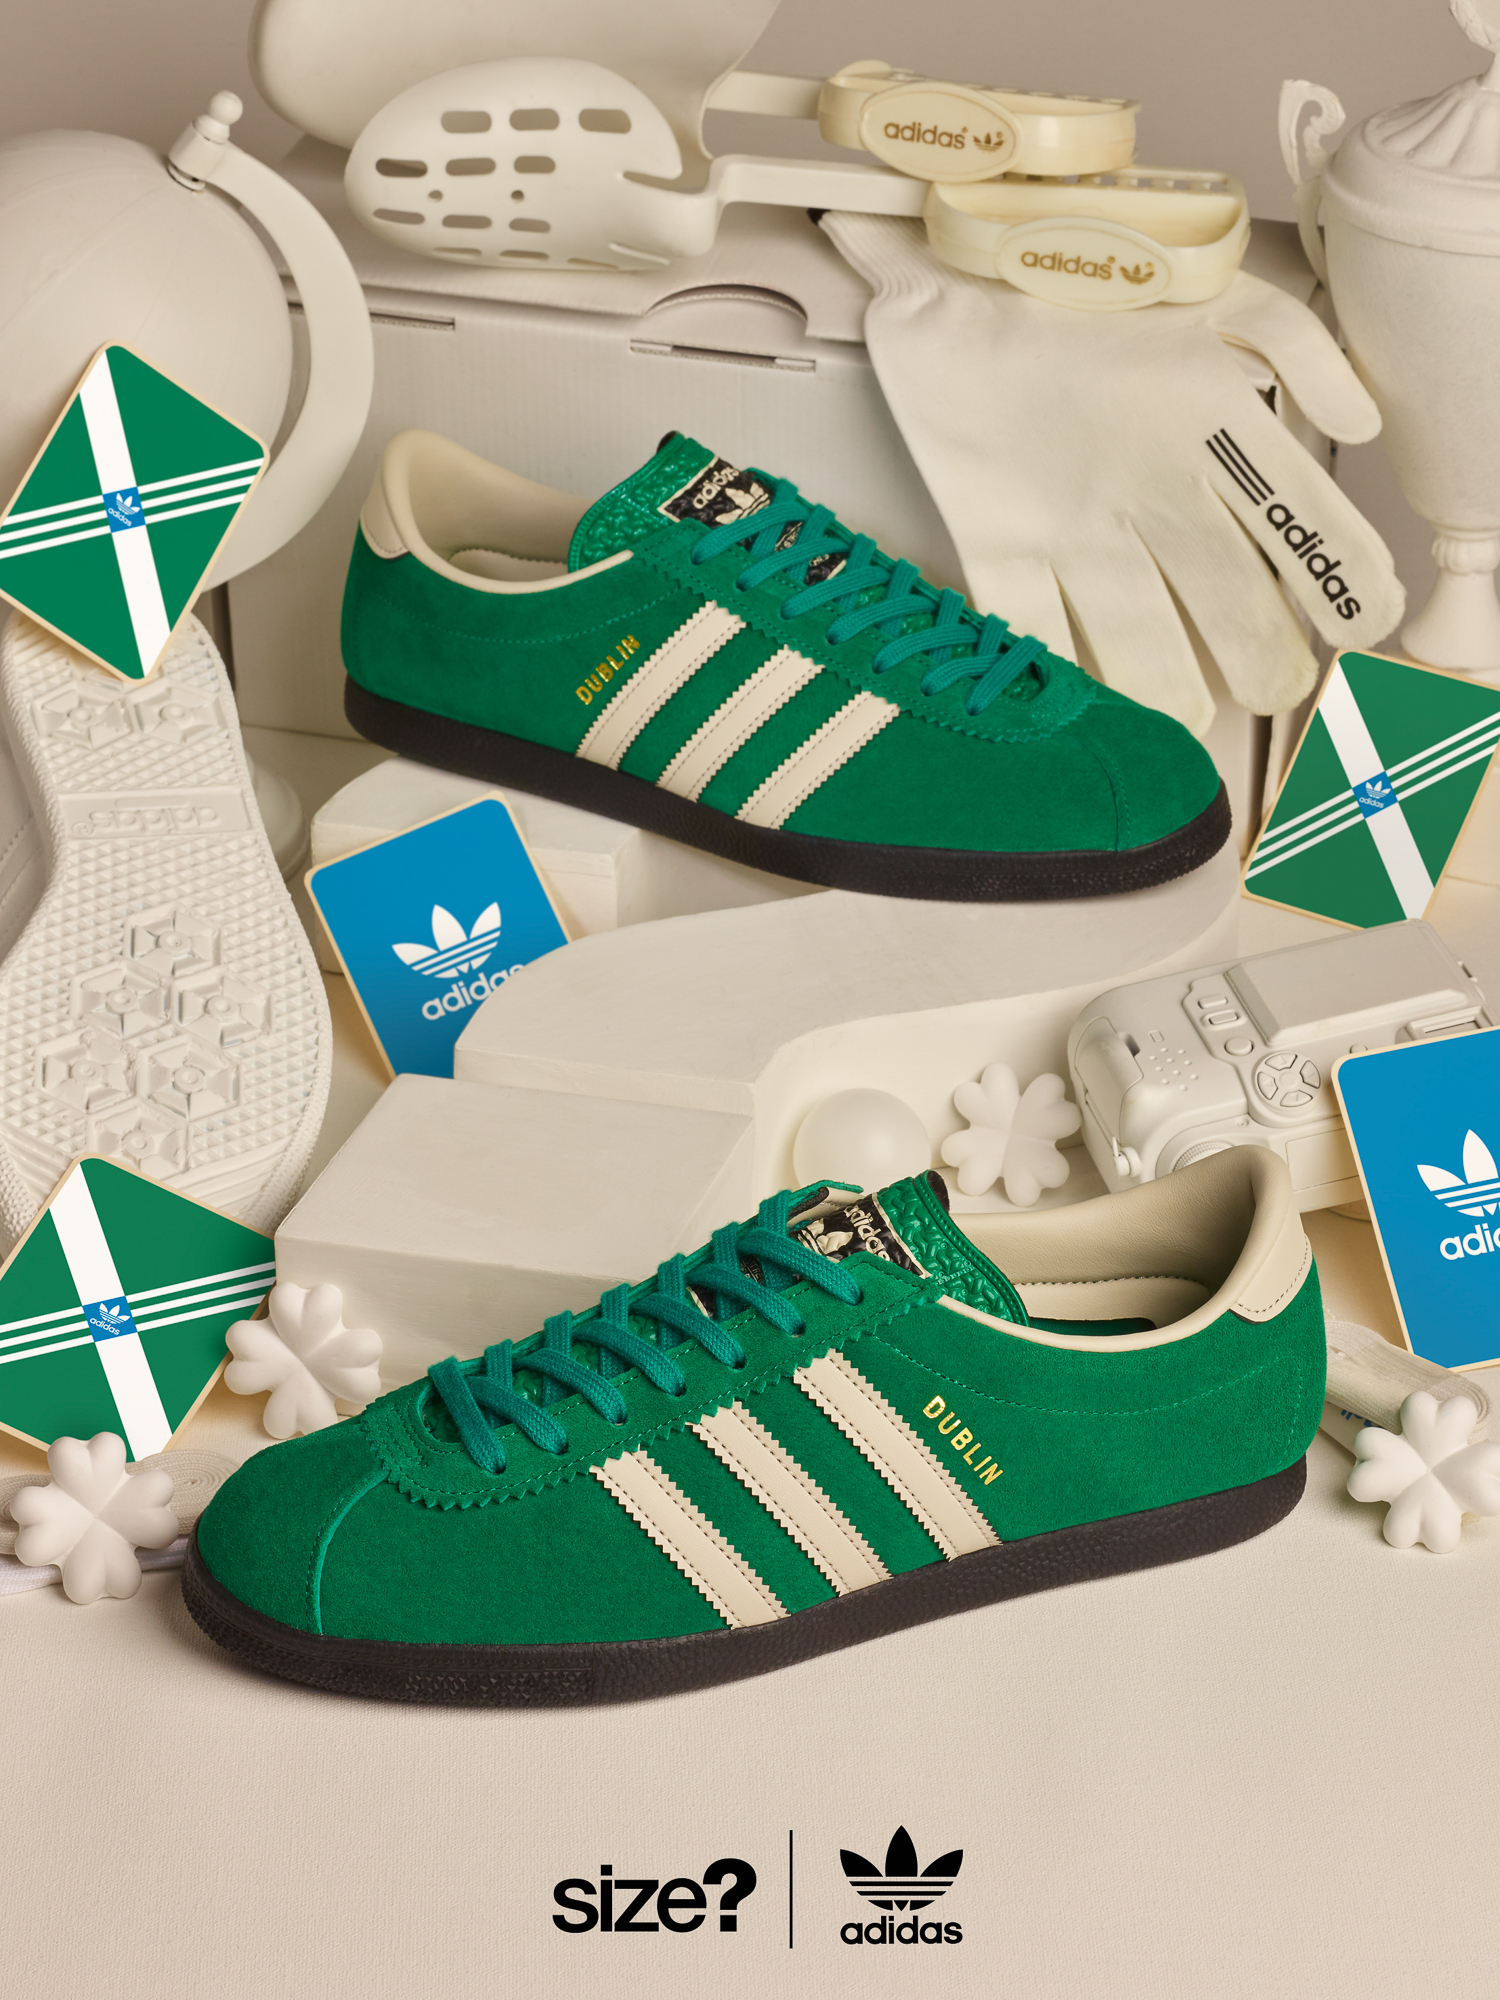 adidas st patrick's day shoes